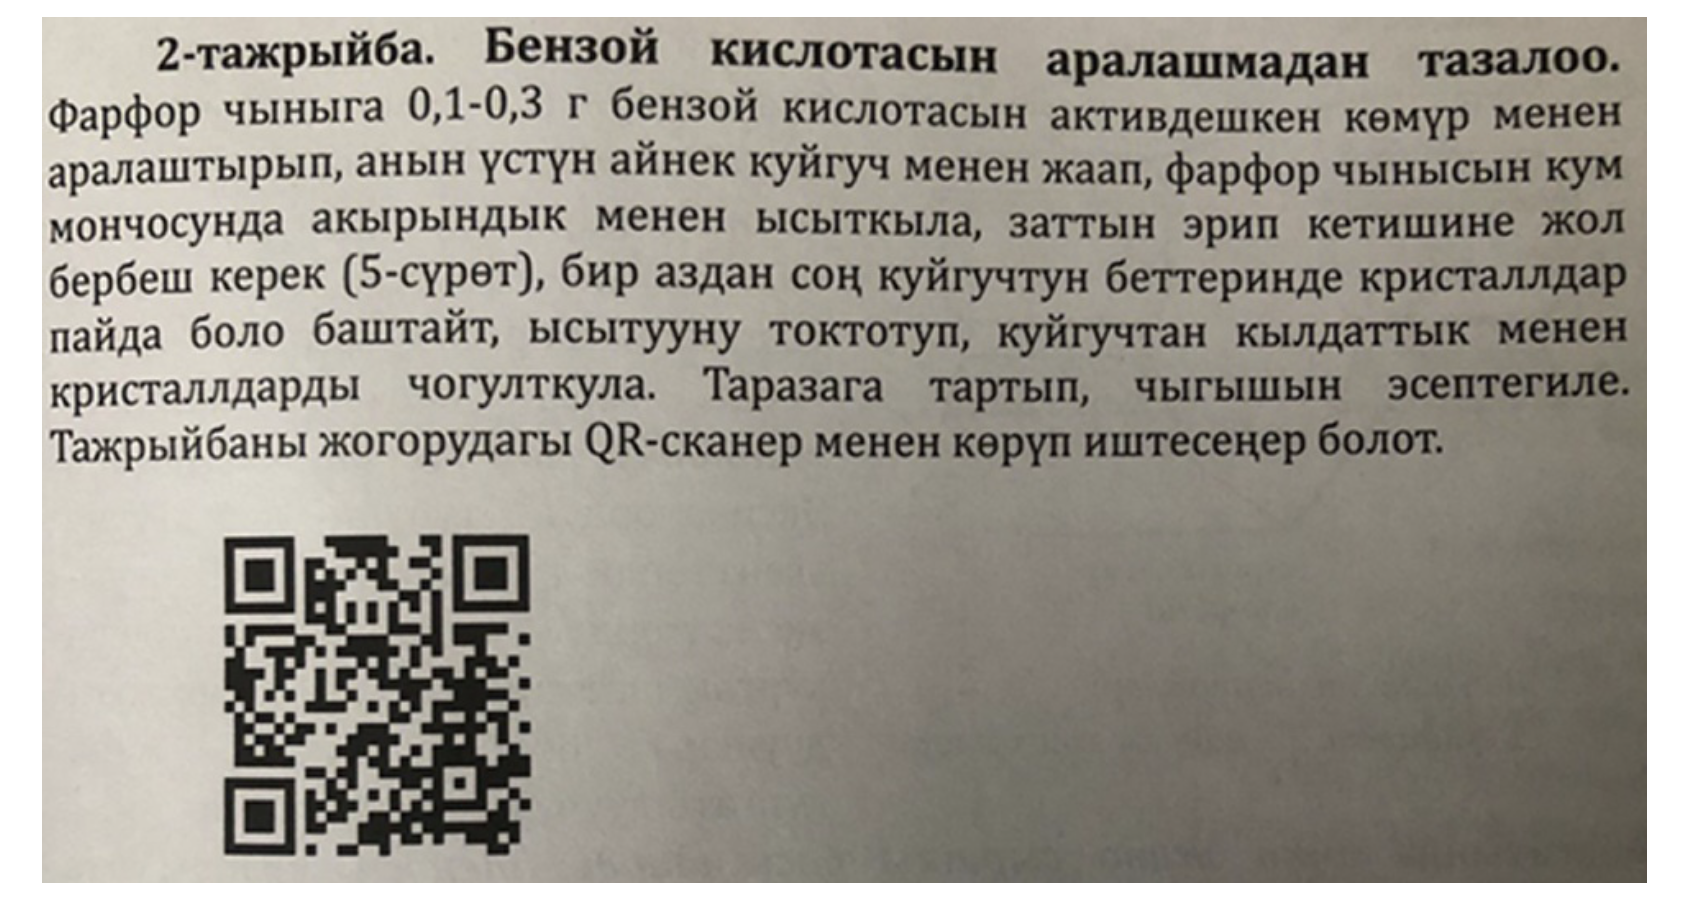 A fragment from the textbook with a description of the experiment and a corresponding QR code.